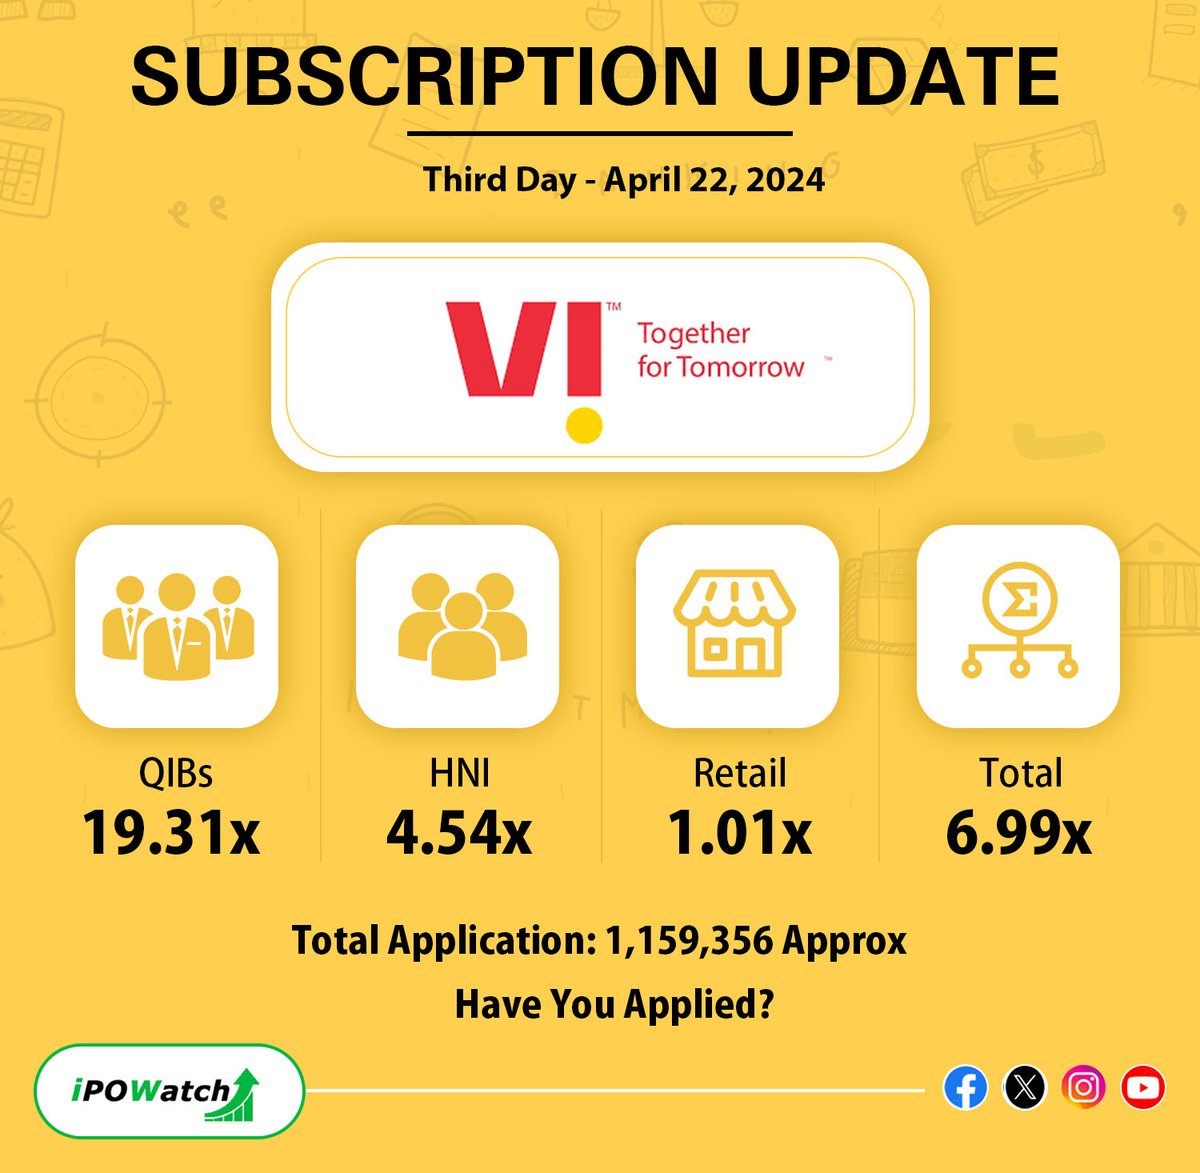 ⮞IPO Alert 🔔

🔸 IPO Subscription Update🔔

Have you Applied for the IPO?

Stay Connected 🤝 with us for all the IPO-related updates 💪

#IPOWatch #ipoupdates #iposubscription #iponews #todaysnews #ipoallotment #ipolisting #ipoalert #ipo #sharemarket